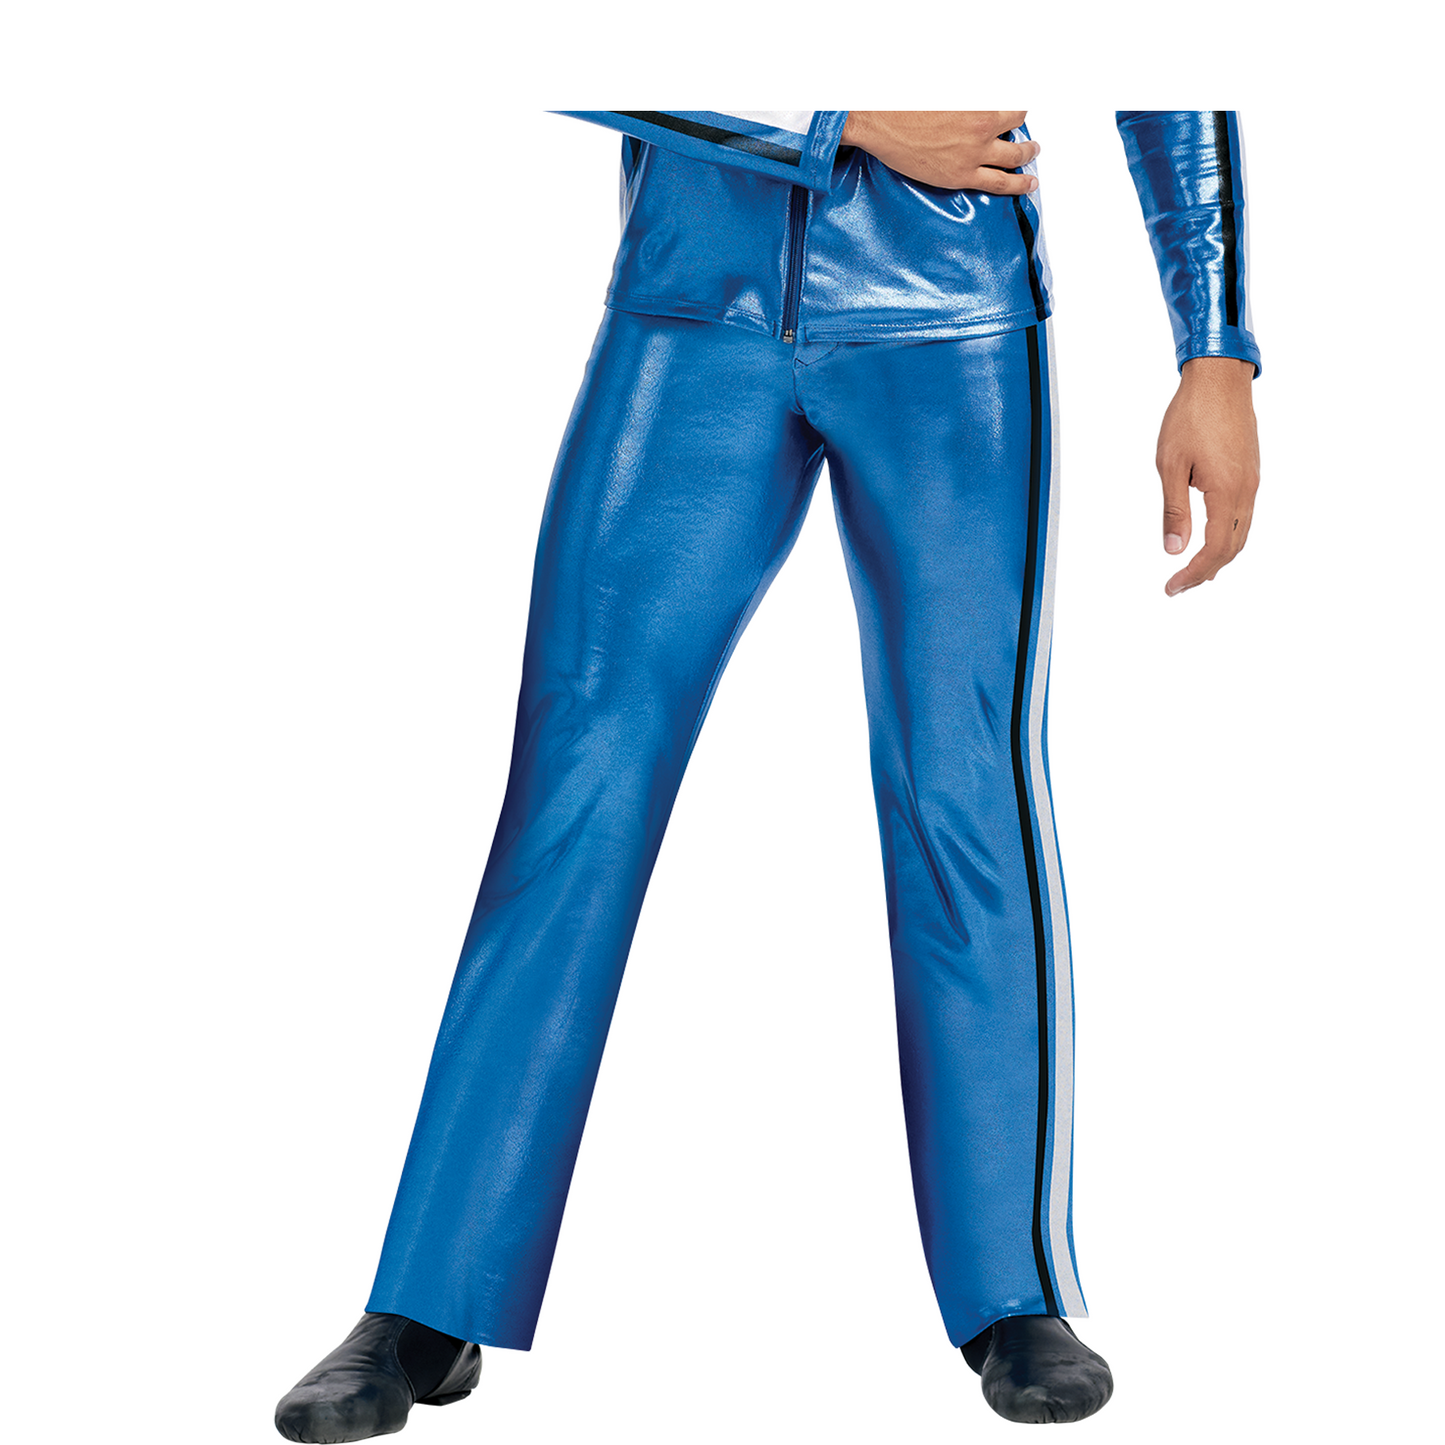 Superstar Male Pant